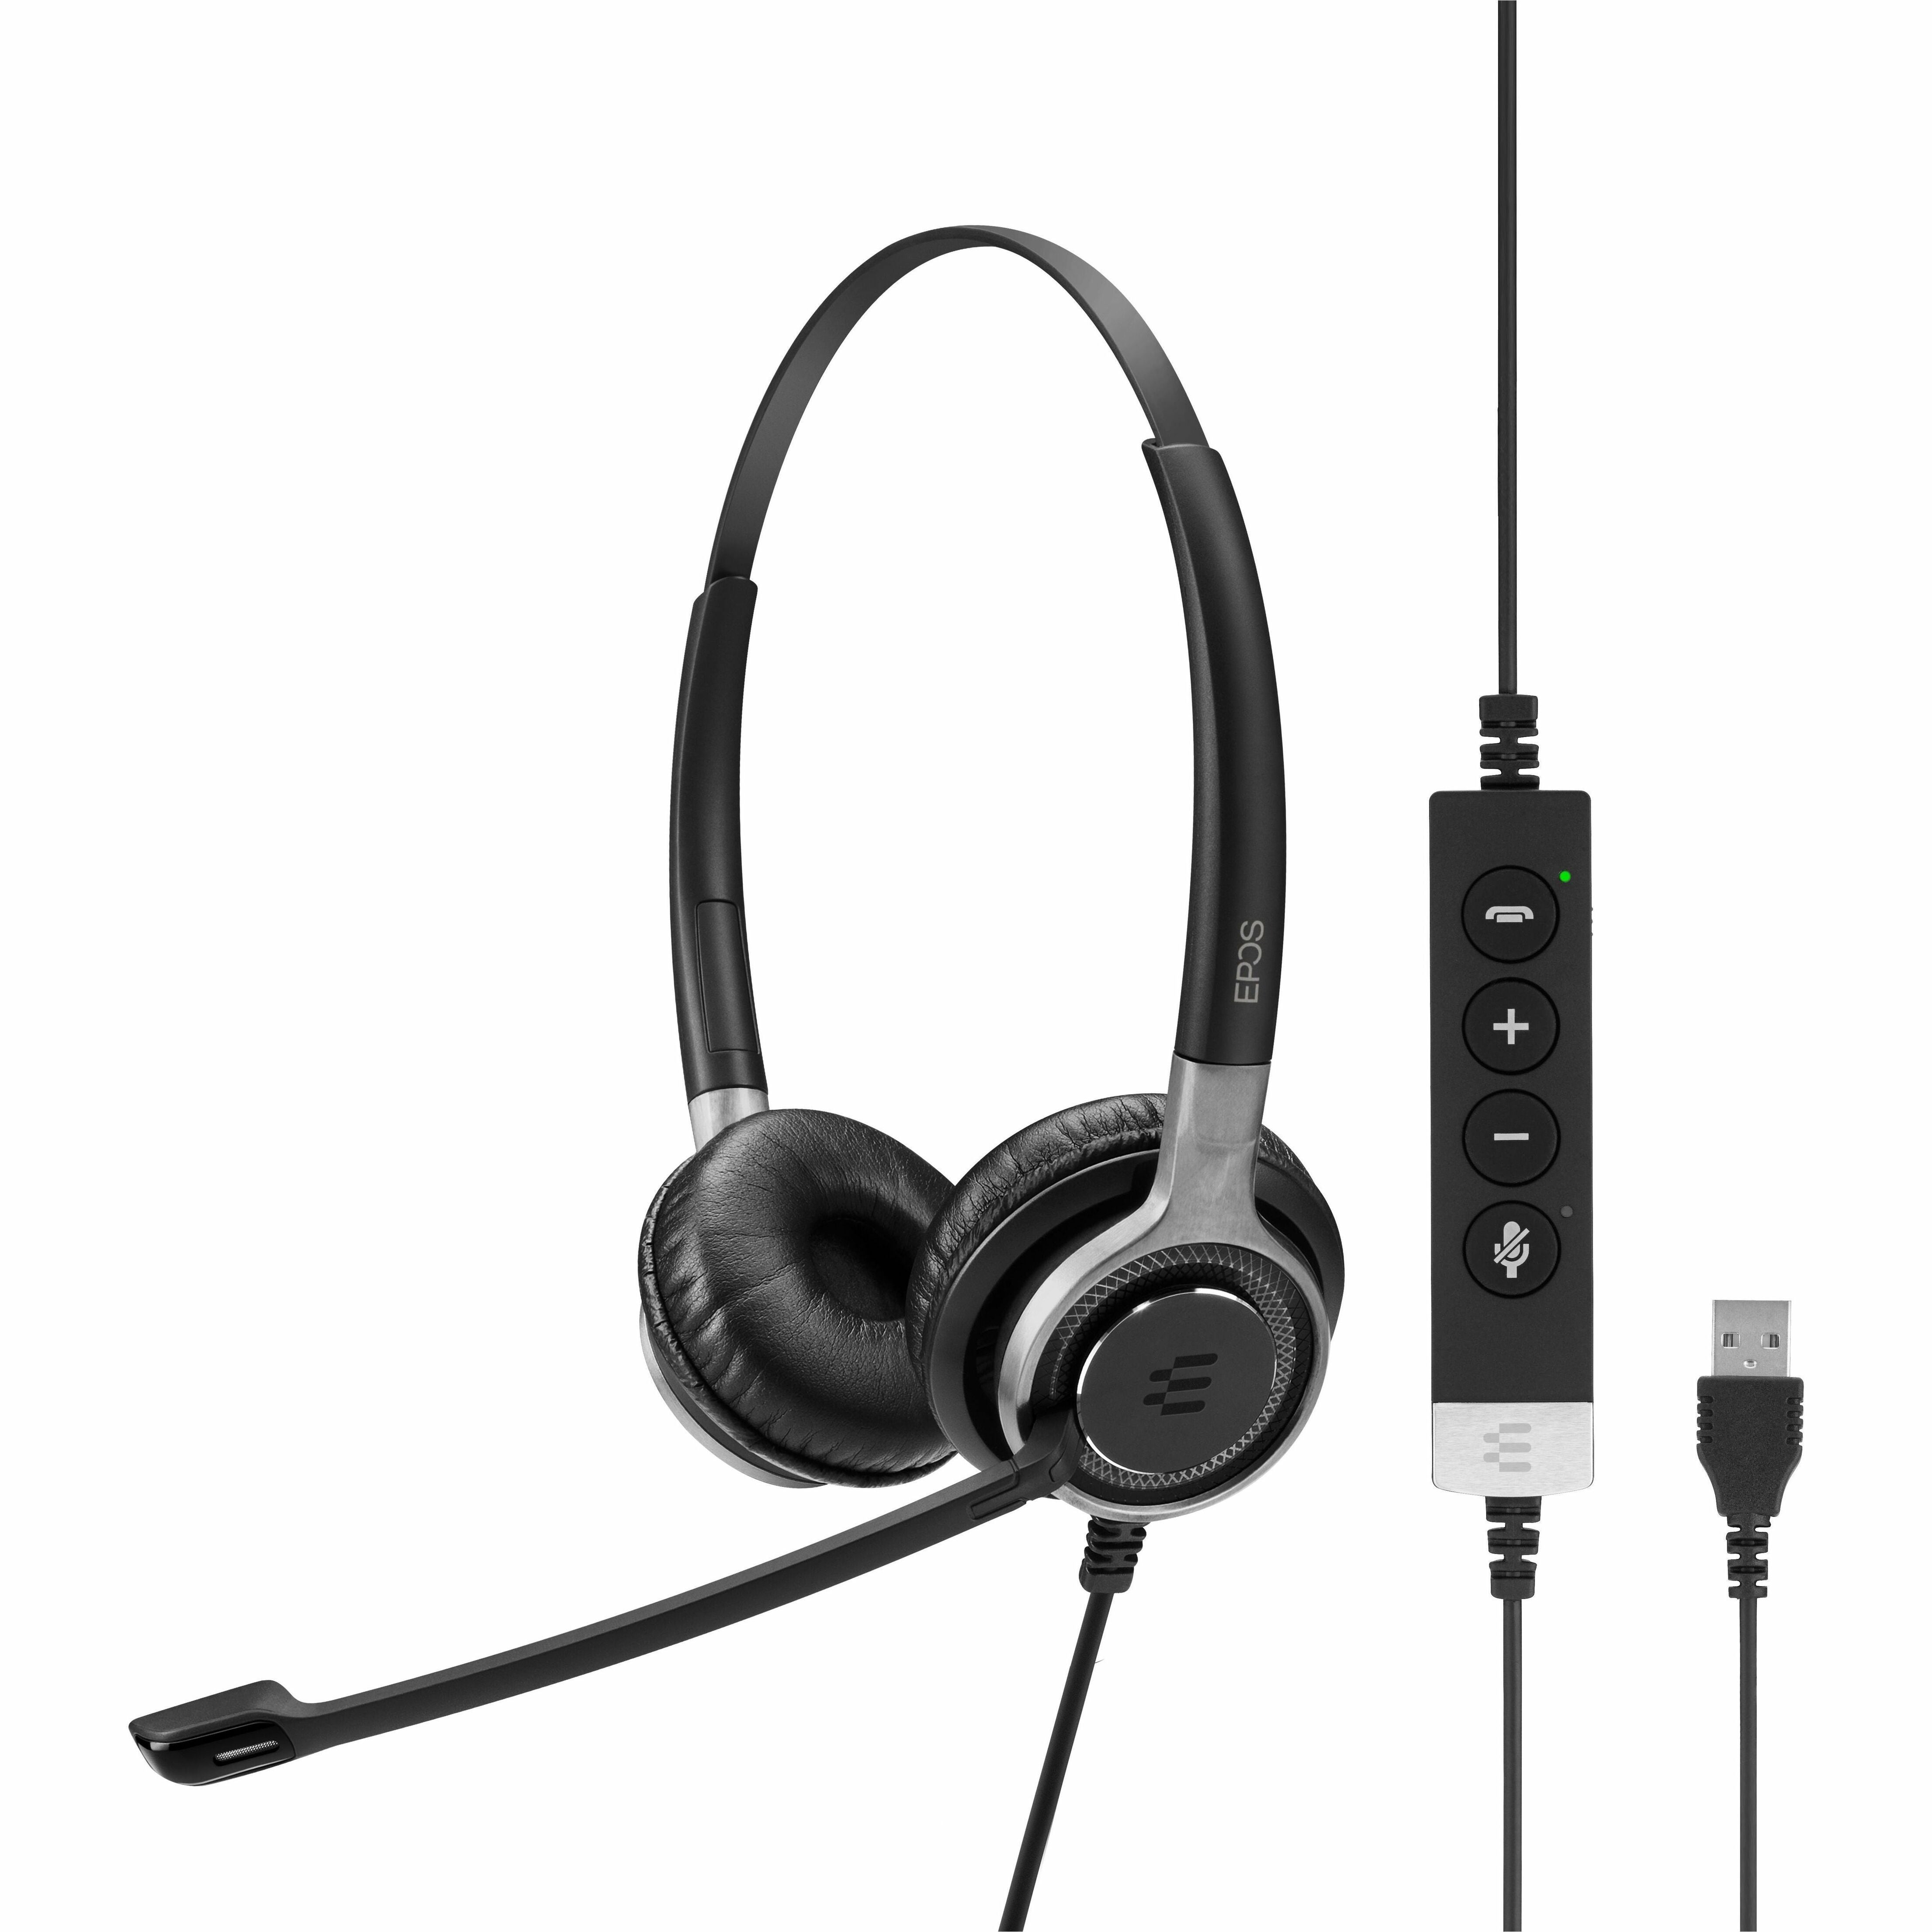 EPOS | SENNHEISER 1000650 IMPACT SC 660 ANC USB Headset, Stereo, Wired, Noise Cancelling Microphone, Black, Silver